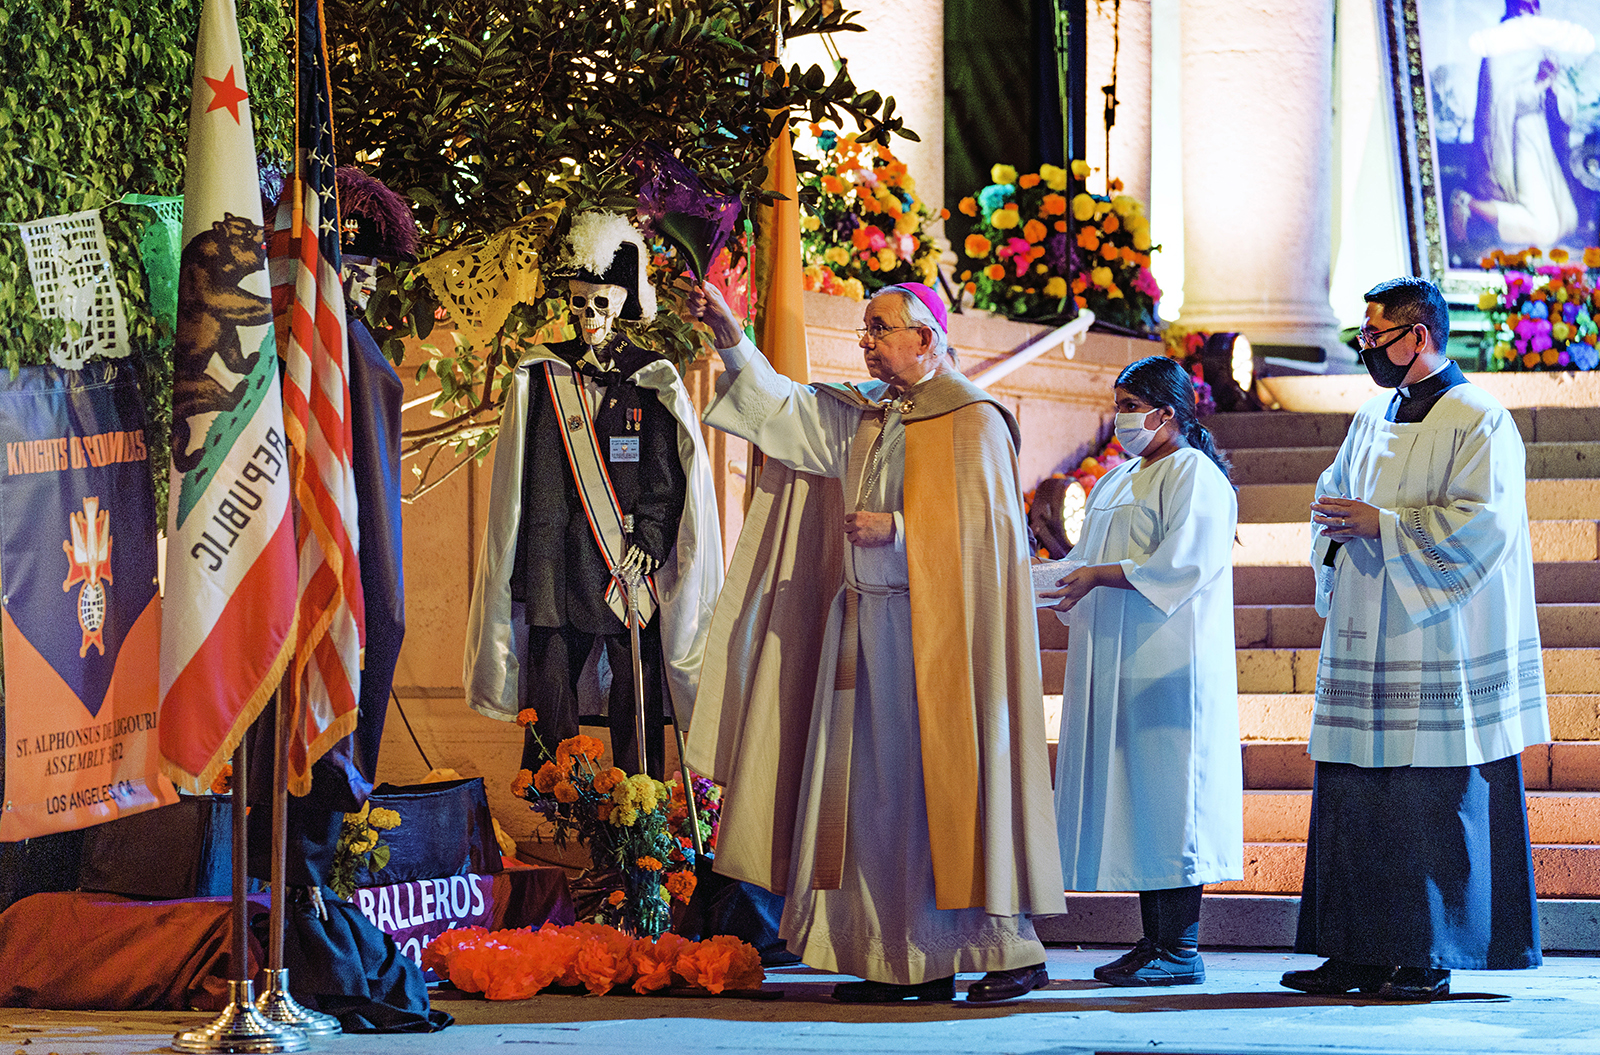 Los Angeles Archbishop José H. Gomez blesses an altar for the Knights of Columbus, Caballeros de Colon, in the outdoor courtyard of the Mausoleum of Calvary Cemetery and Mortuary in East Los Angeles, Sunday, Nov. 1, 2020. Day of the Dead, or Dia de Los Muertos, is the annual Mexican tradition of reminiscing about departed loved ones with colorful altars, or ofrendas. (AP Photo/Damian Dovarganes)